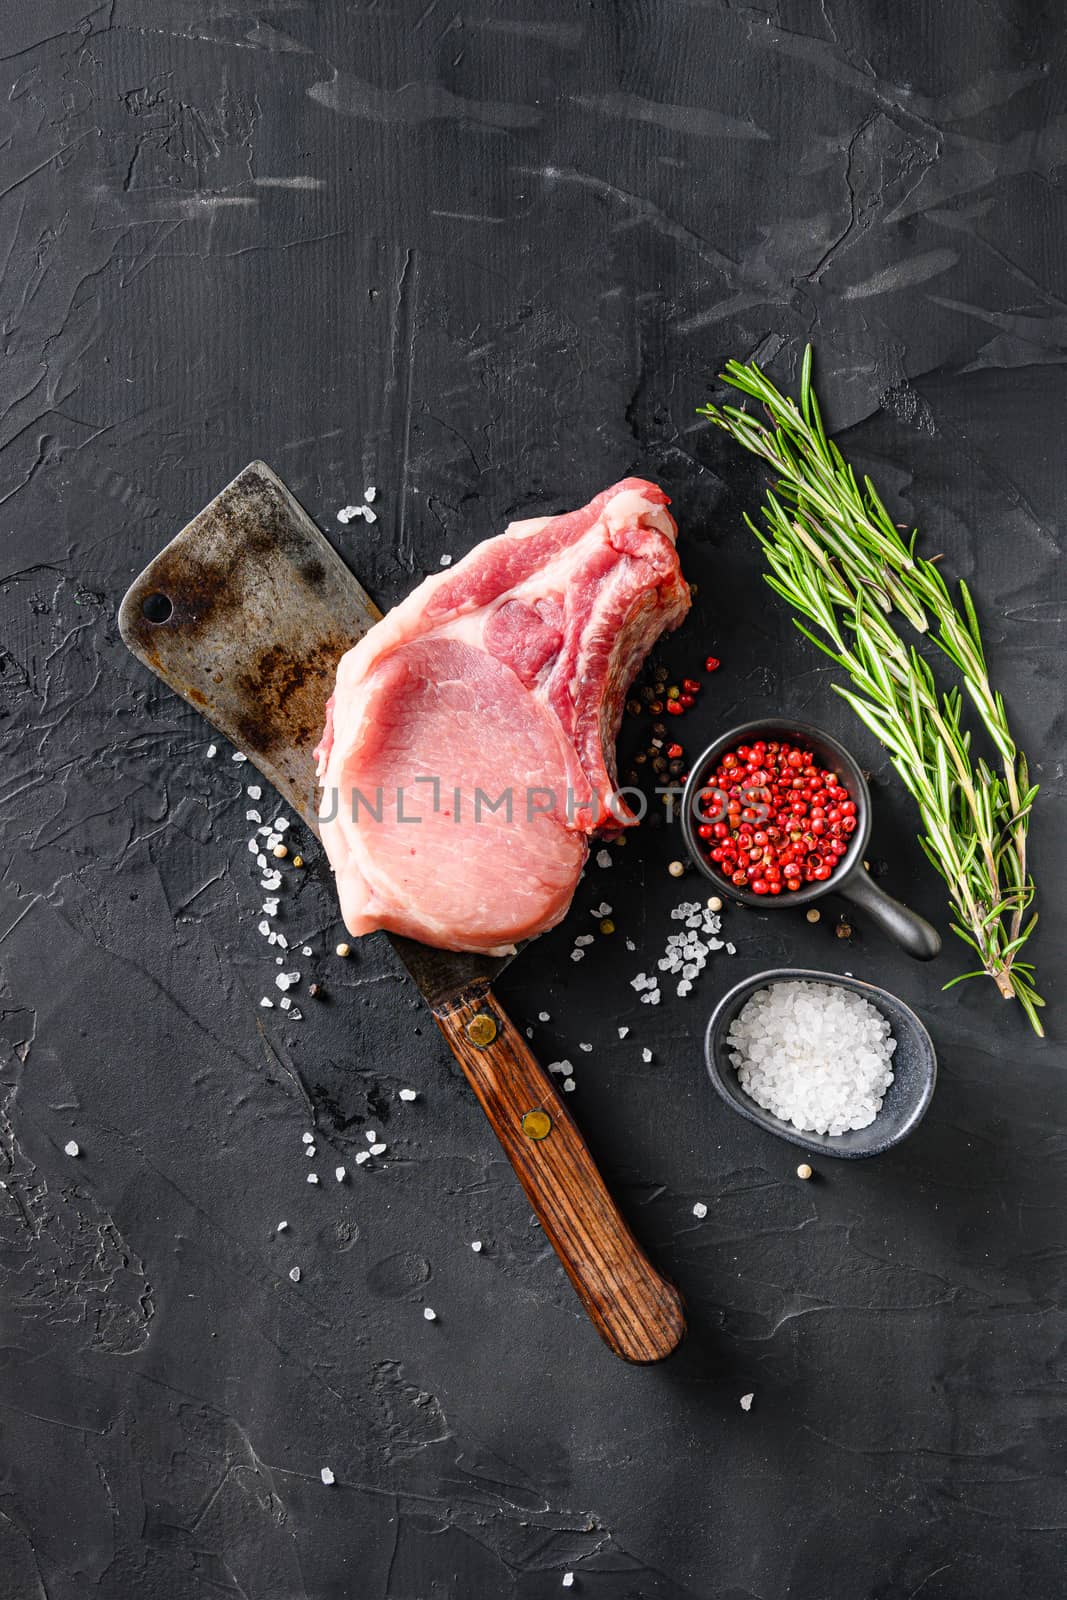 Organic cutlet on a rib or Pork meat over american classic butcher knife or cleaver with spices and rosemary and red pepper on black slate top view. vertical by Ilianesolenyi